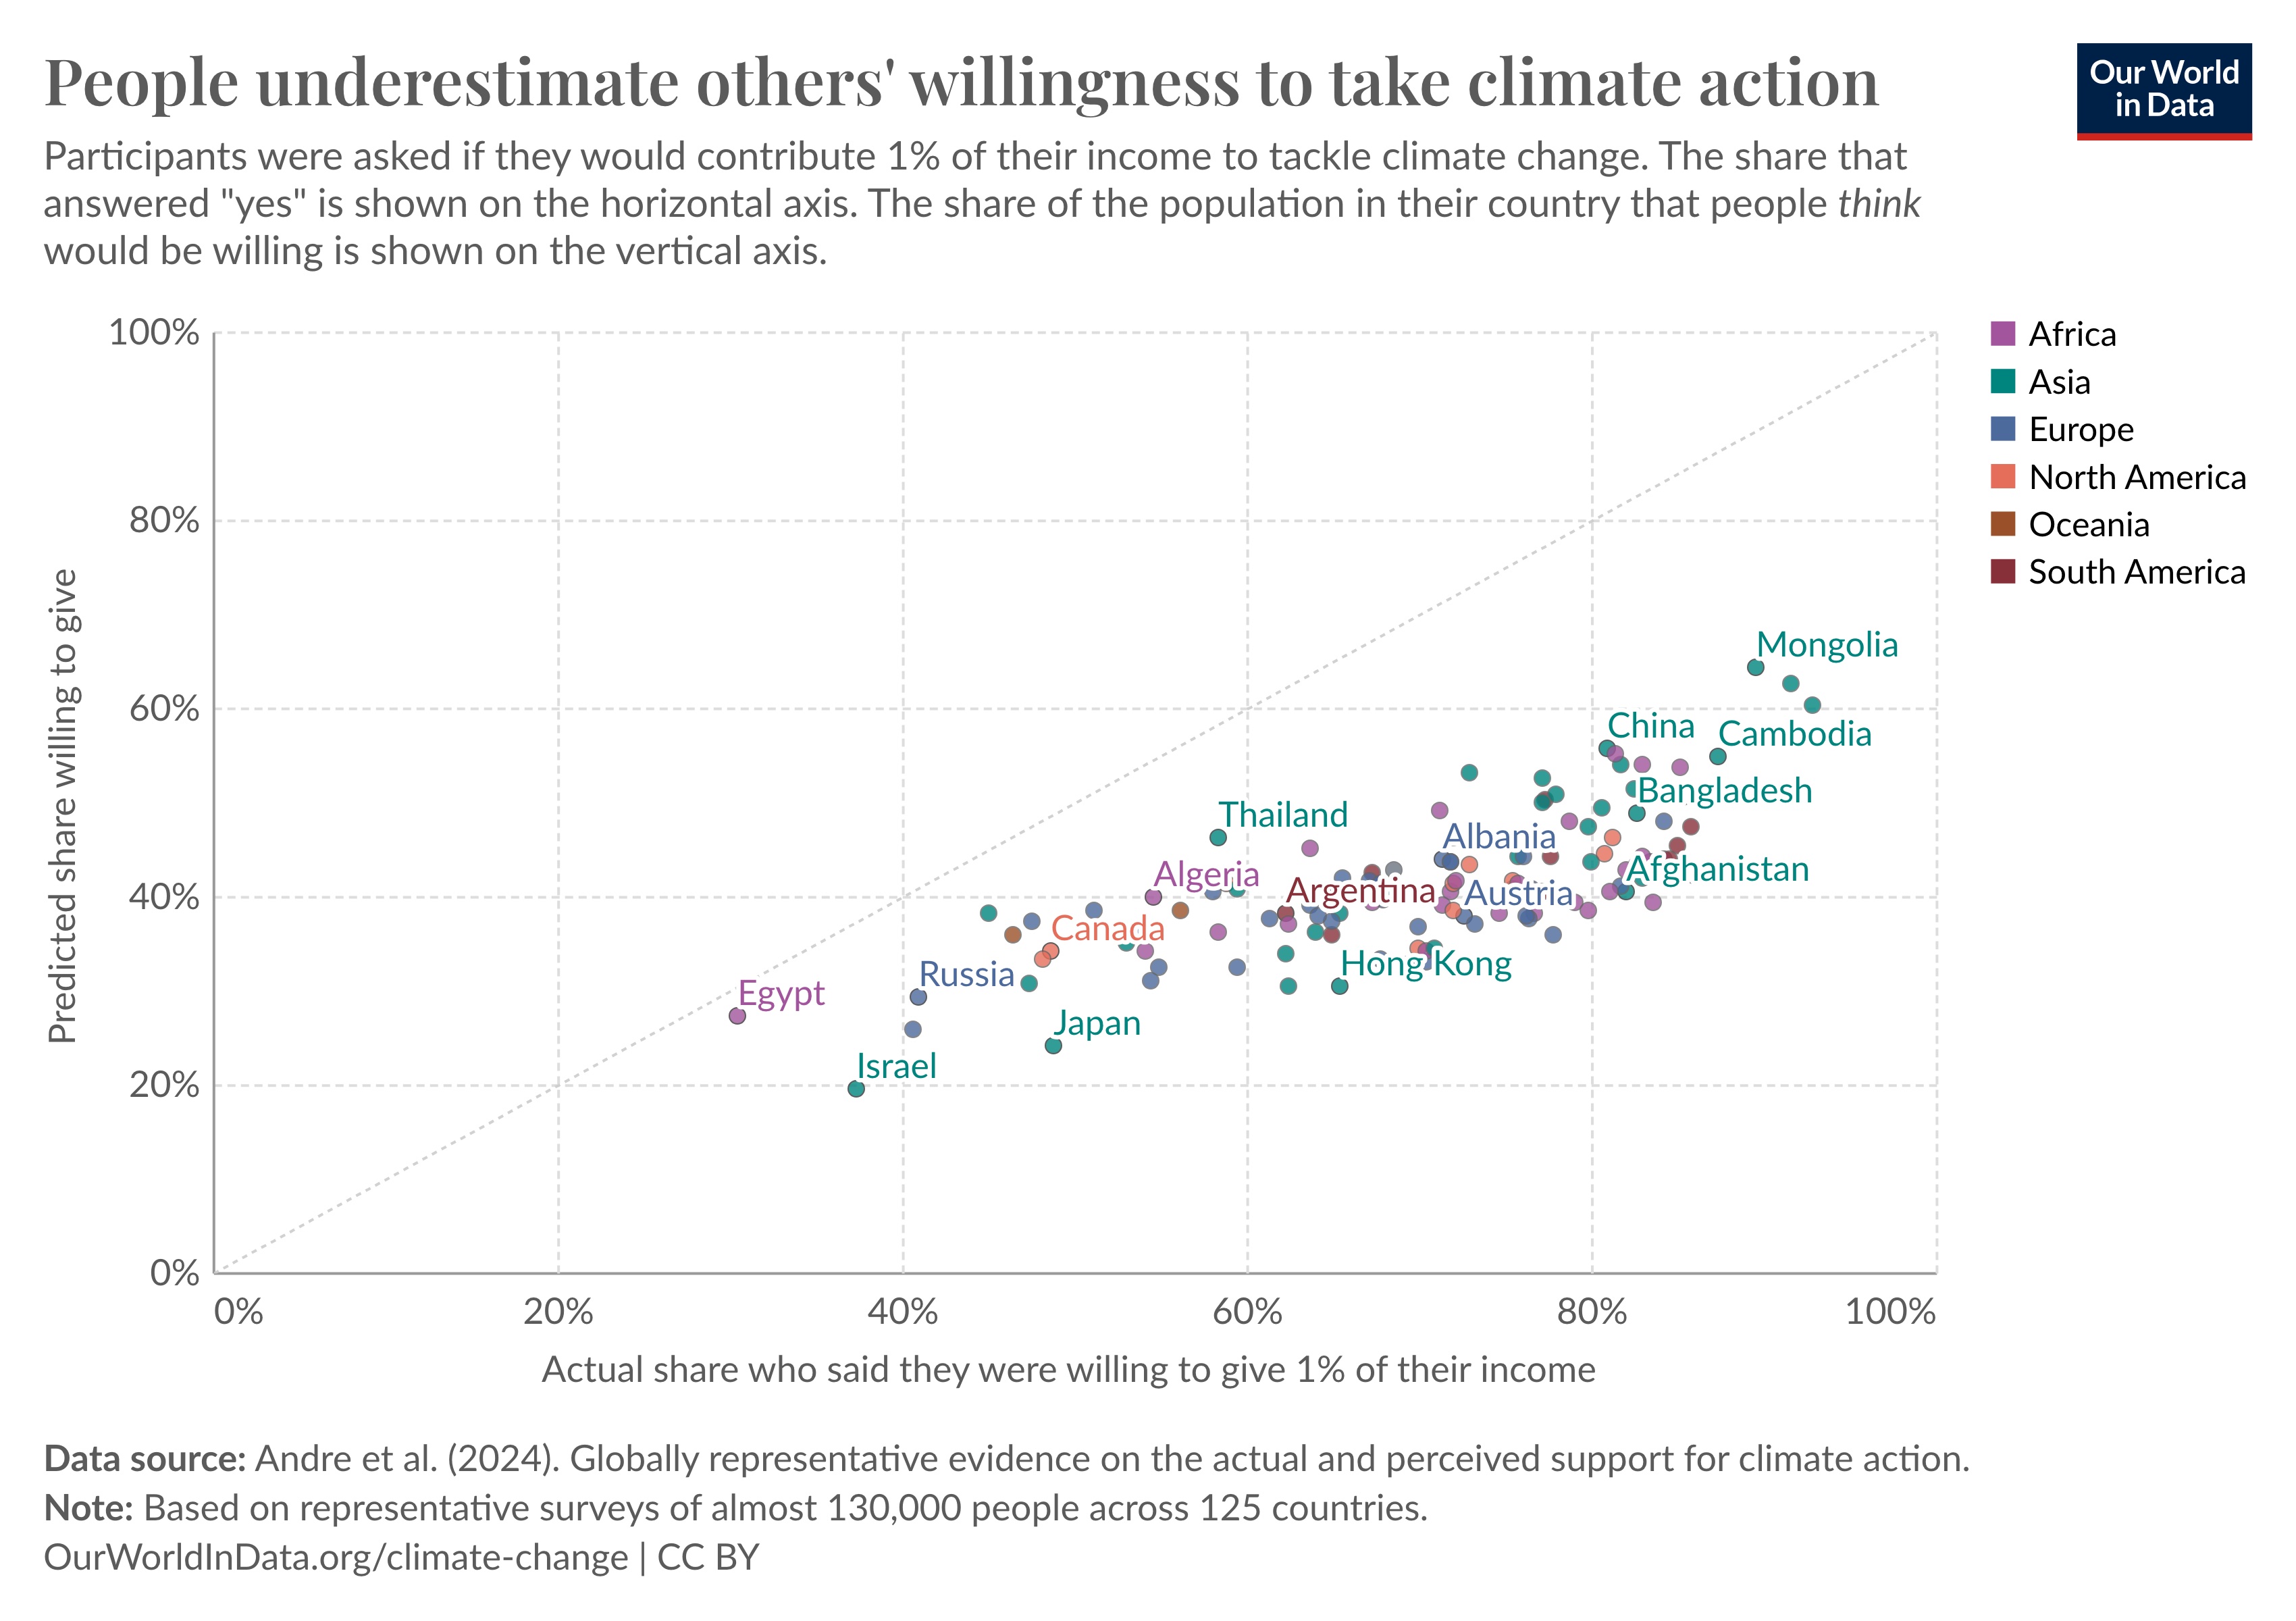 Scatter plot illustrating a survey on predicted willingness versus actual willingness to donate 1% of income for climate action, with data points labeled by country, categorized by continents.